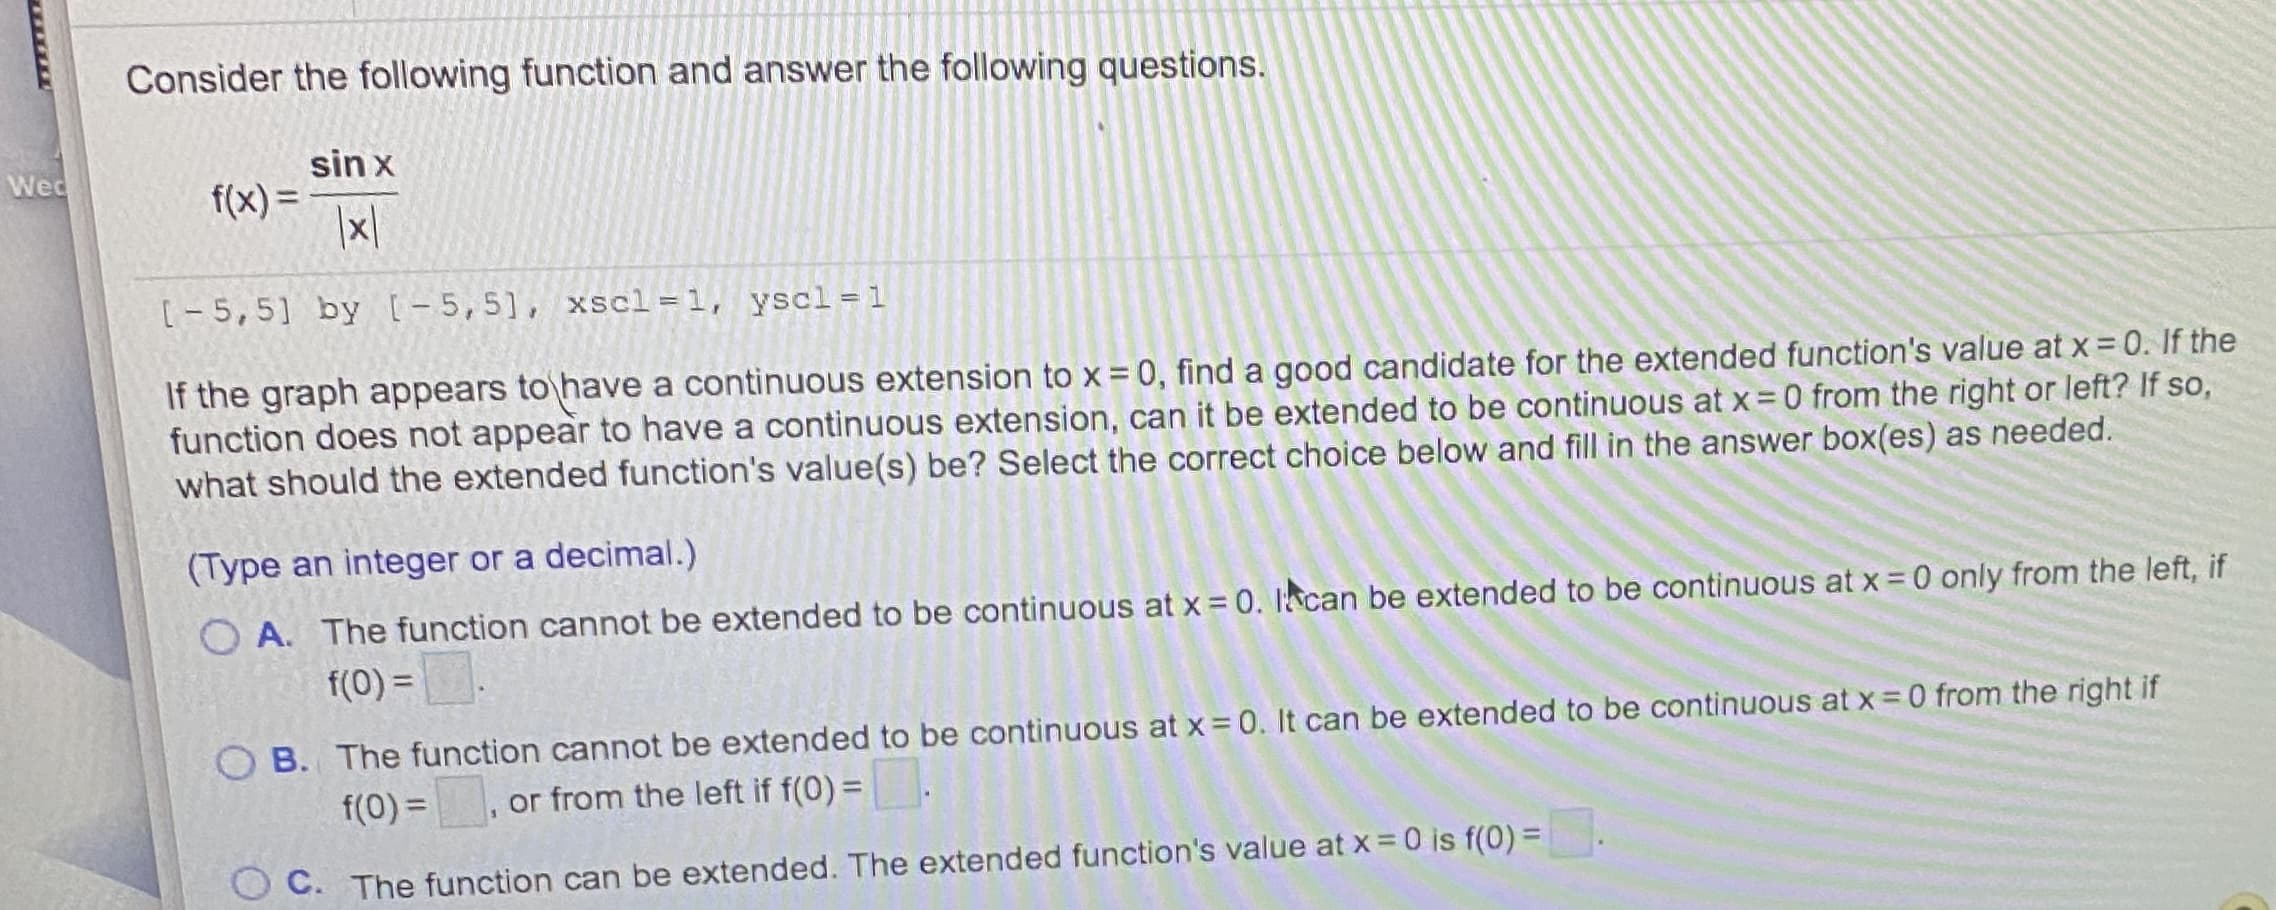 Consider the following function and answer the following questions.
sin x
f(x) =
[-5,5] by [-5,5], xscl=1, yscl =1
If the graph appears to have a continuous extension to x = 0, find a good candidate for the extended function's value at x = 0. If the
function does not appear to have a continuous extension, can it be extended to be continuous at x= 0 from the right or left? If so,
what should the extended function's value(s) be? Select the correct choice below and fill in the answer box(es) as needed.
